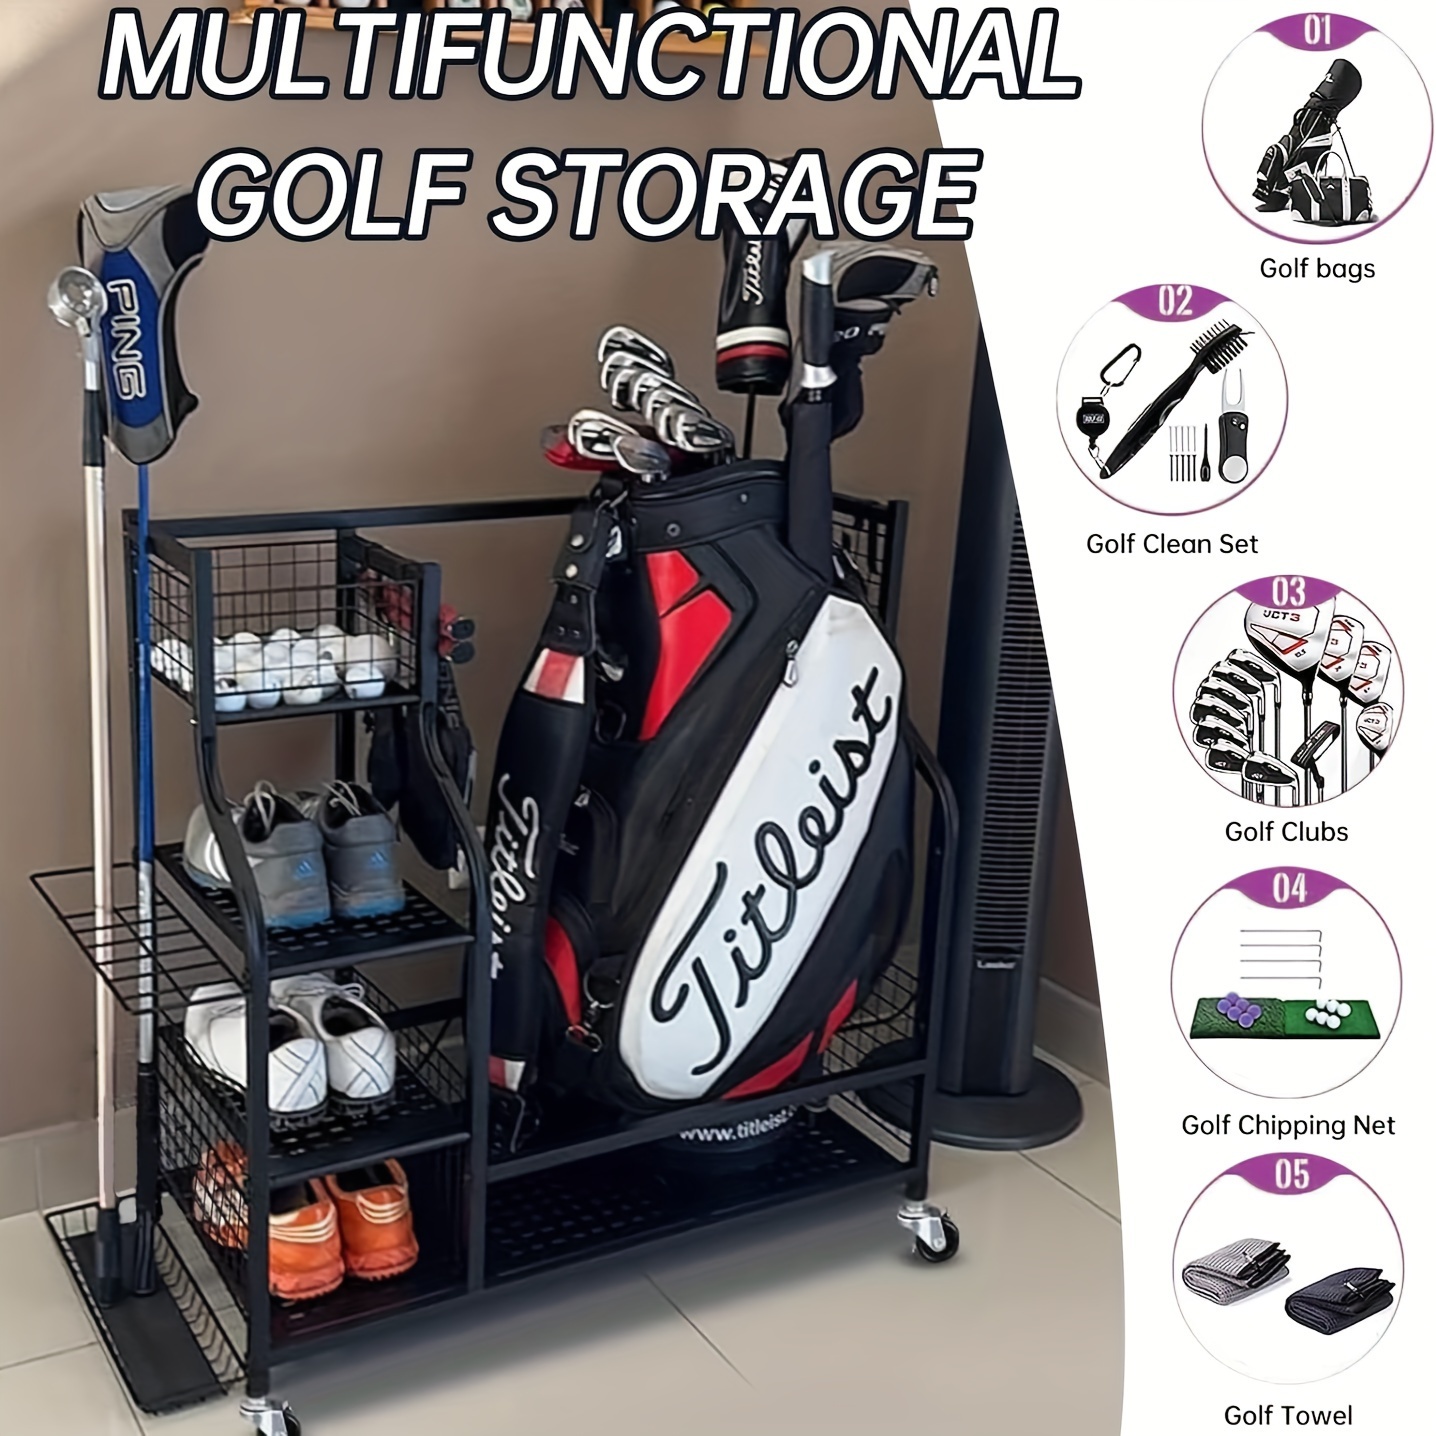 

Golf Bag Storage Organizer, Golf Organizer Fits 2 Golf Bags And Other Sports Equipment, Golf Accessories, Extra Large Size Golf Rack For Garage, Shed, Basement